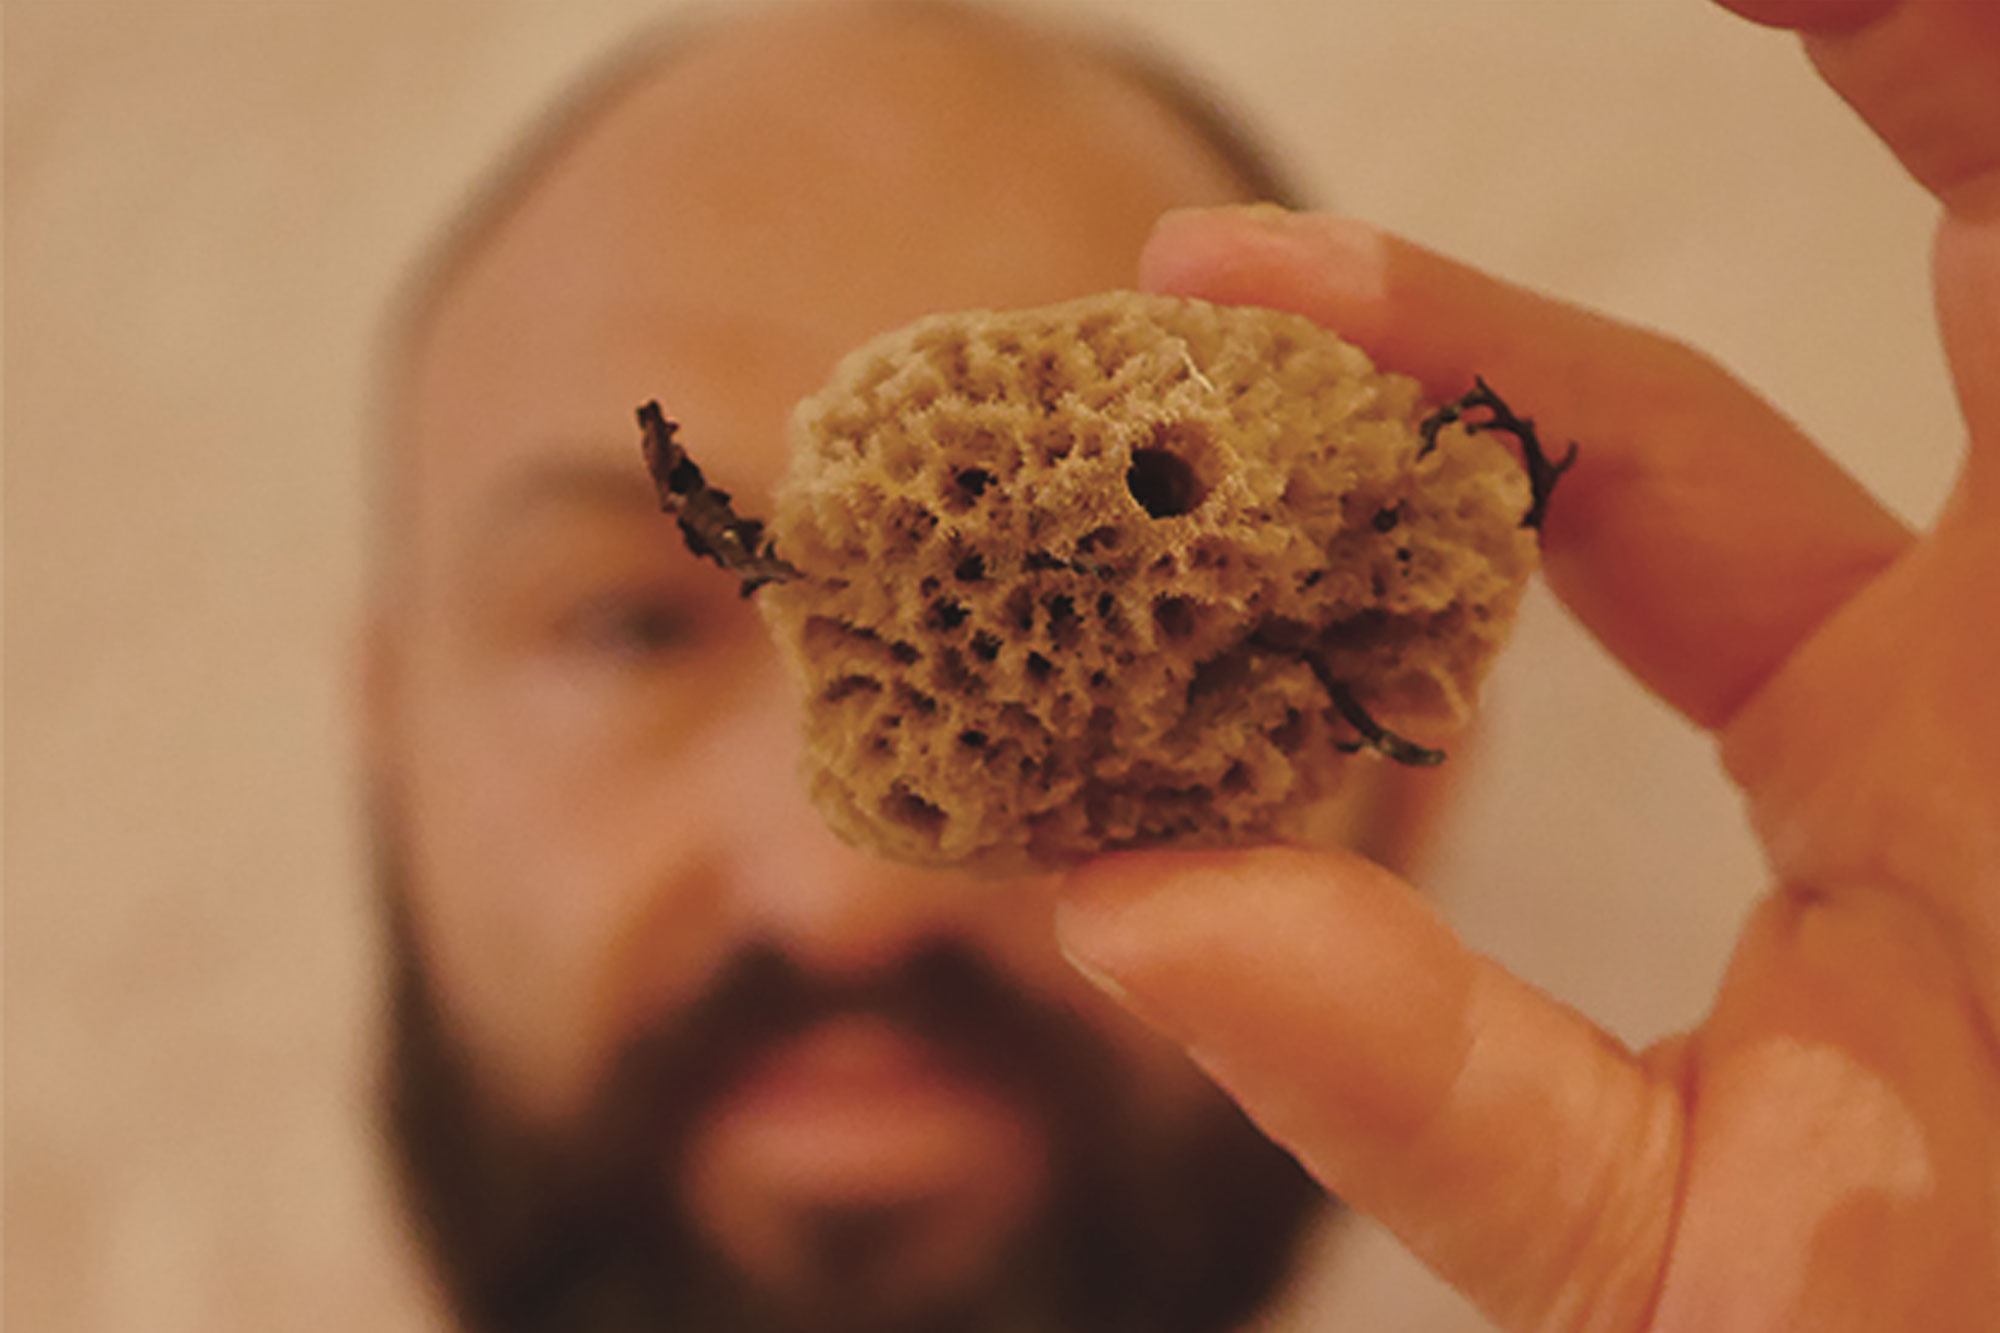 In this image, the person is blurred and there is a sea sponge in focus. The sea sponge is yellow and spongey, and has bits of seaweed coming out of it. You can make out that the person has a big black beard, dark eyes and short-cropped hair. They are wearing a red shirt and there is a yellow light making the photograph have a warm feeling. The background looks like a clay wall.